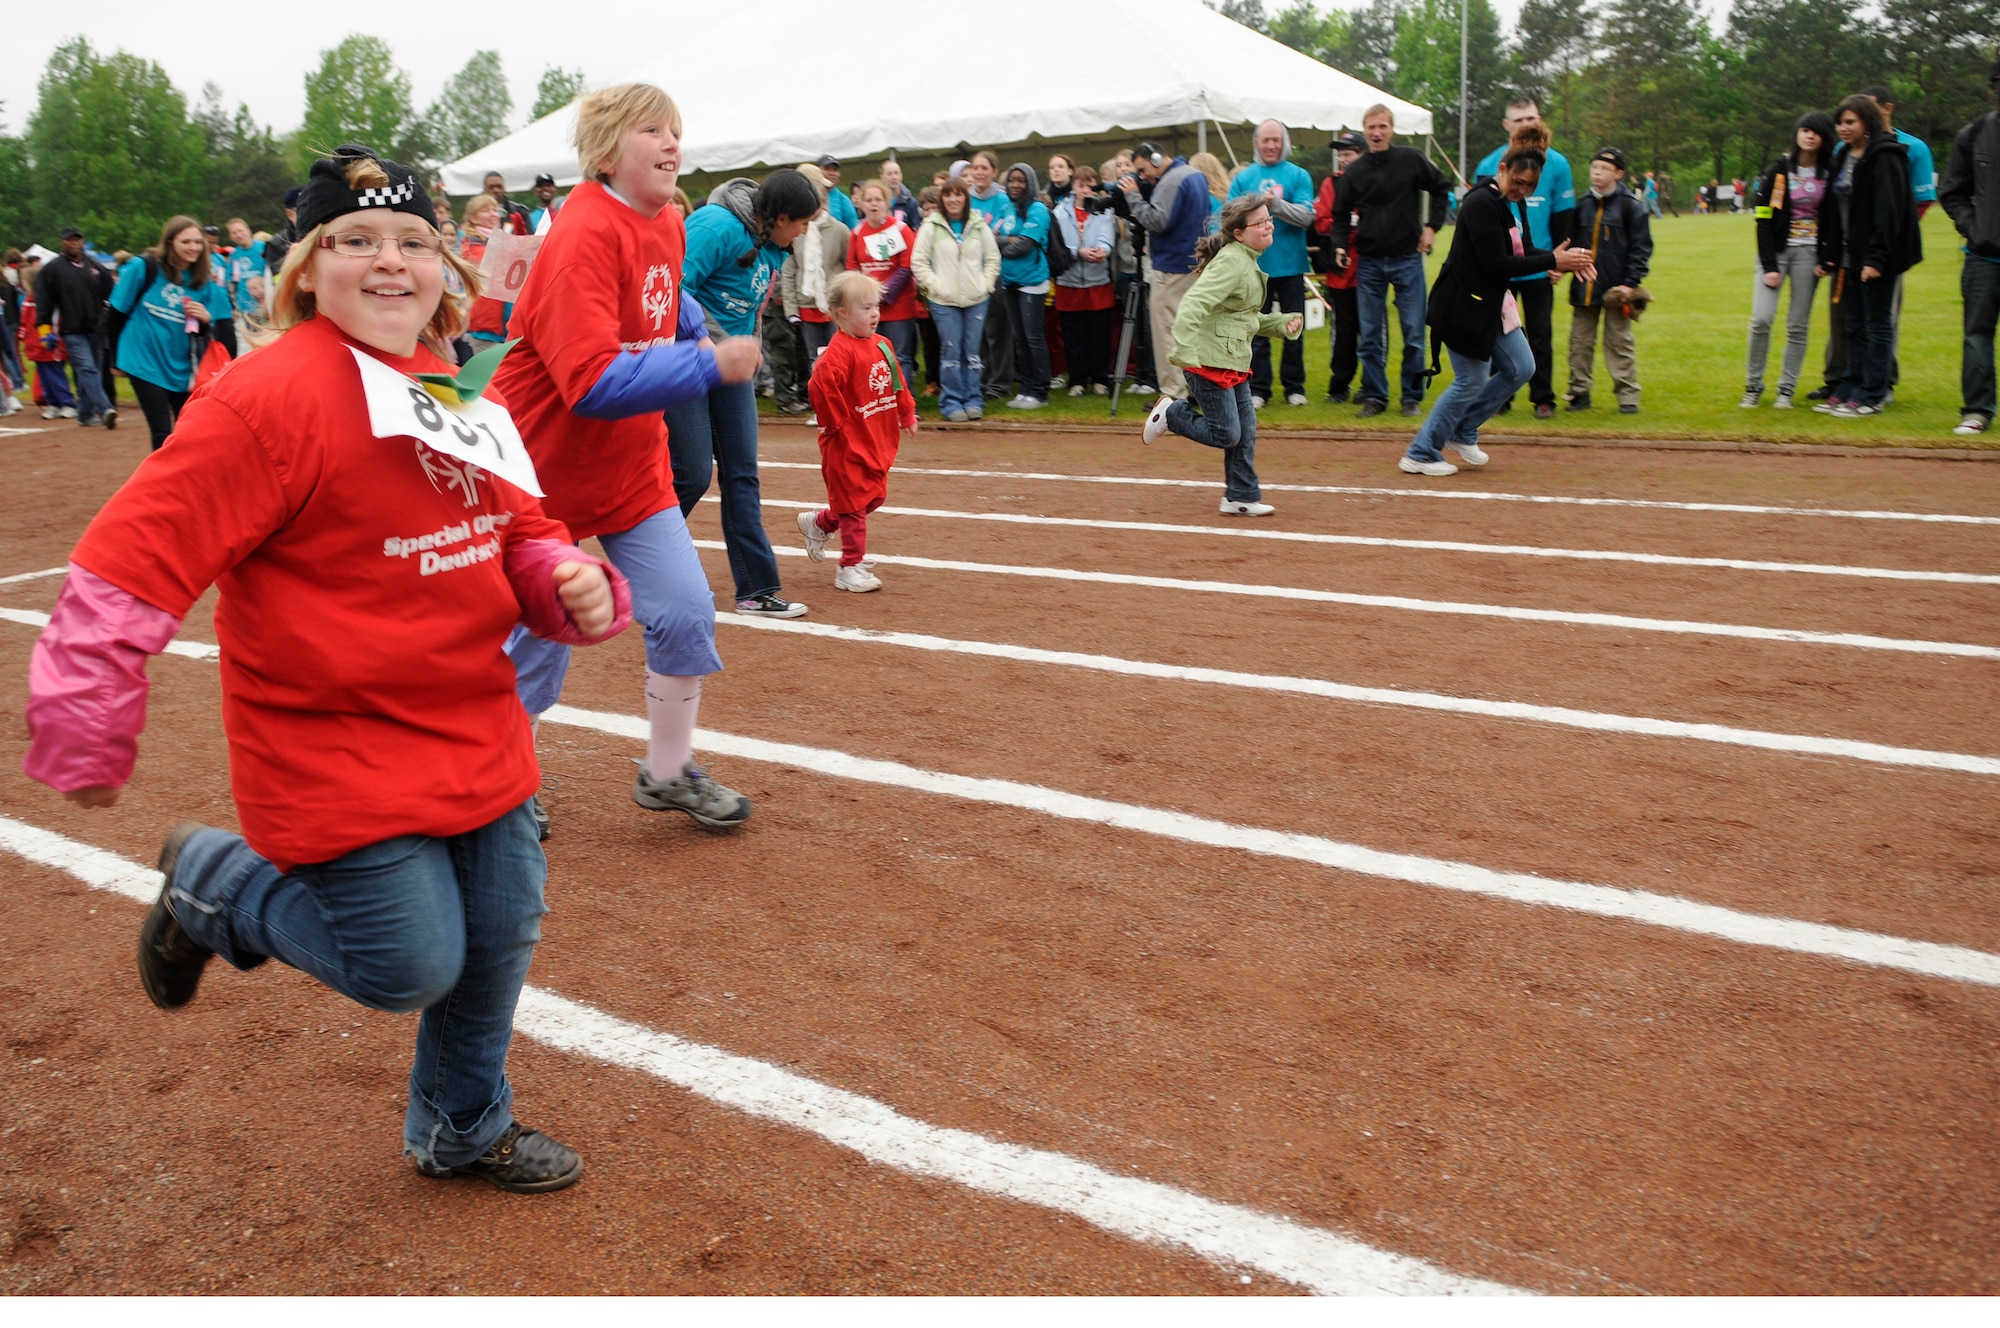 Athletes and their buddies race at the Special Olympics held in Enkenbach-Alsenborn, Germany, May 12, 2010. Special Olympics is a worldwide event for children and adults with disabilities to build confidence and foster friendship. The Kaiserslautern Military Community hosted its 27th Annual Special Olympics for over 800 athletes. (U.S. Air Force photo by Airman 1st Class Desiree Esposito)